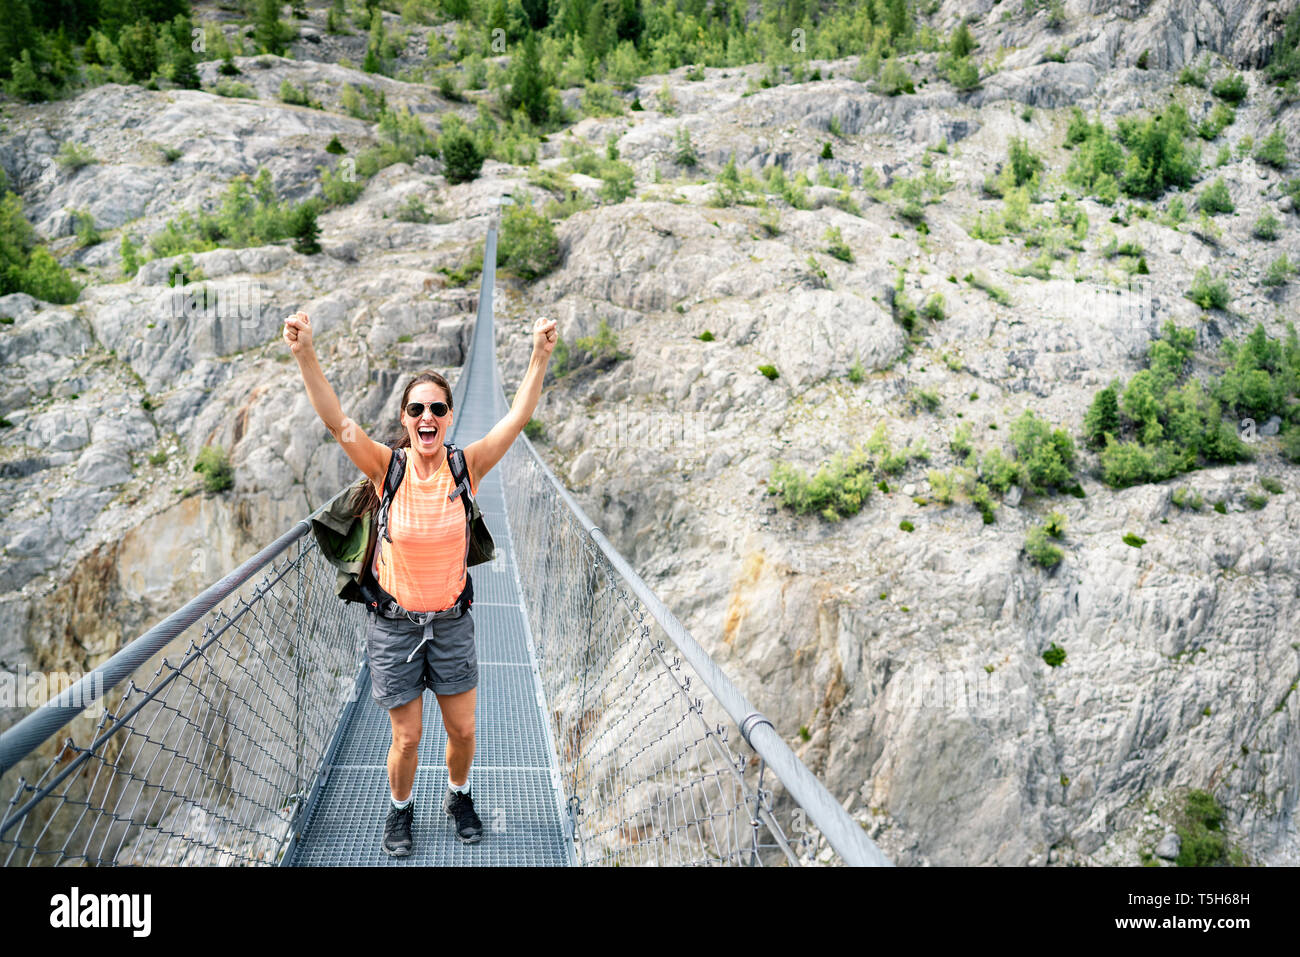 Switzerland, Valais, cheering woman on a hiking trip in the mountains from Belalp to Riederalp on a swinging bridge Stock Photo